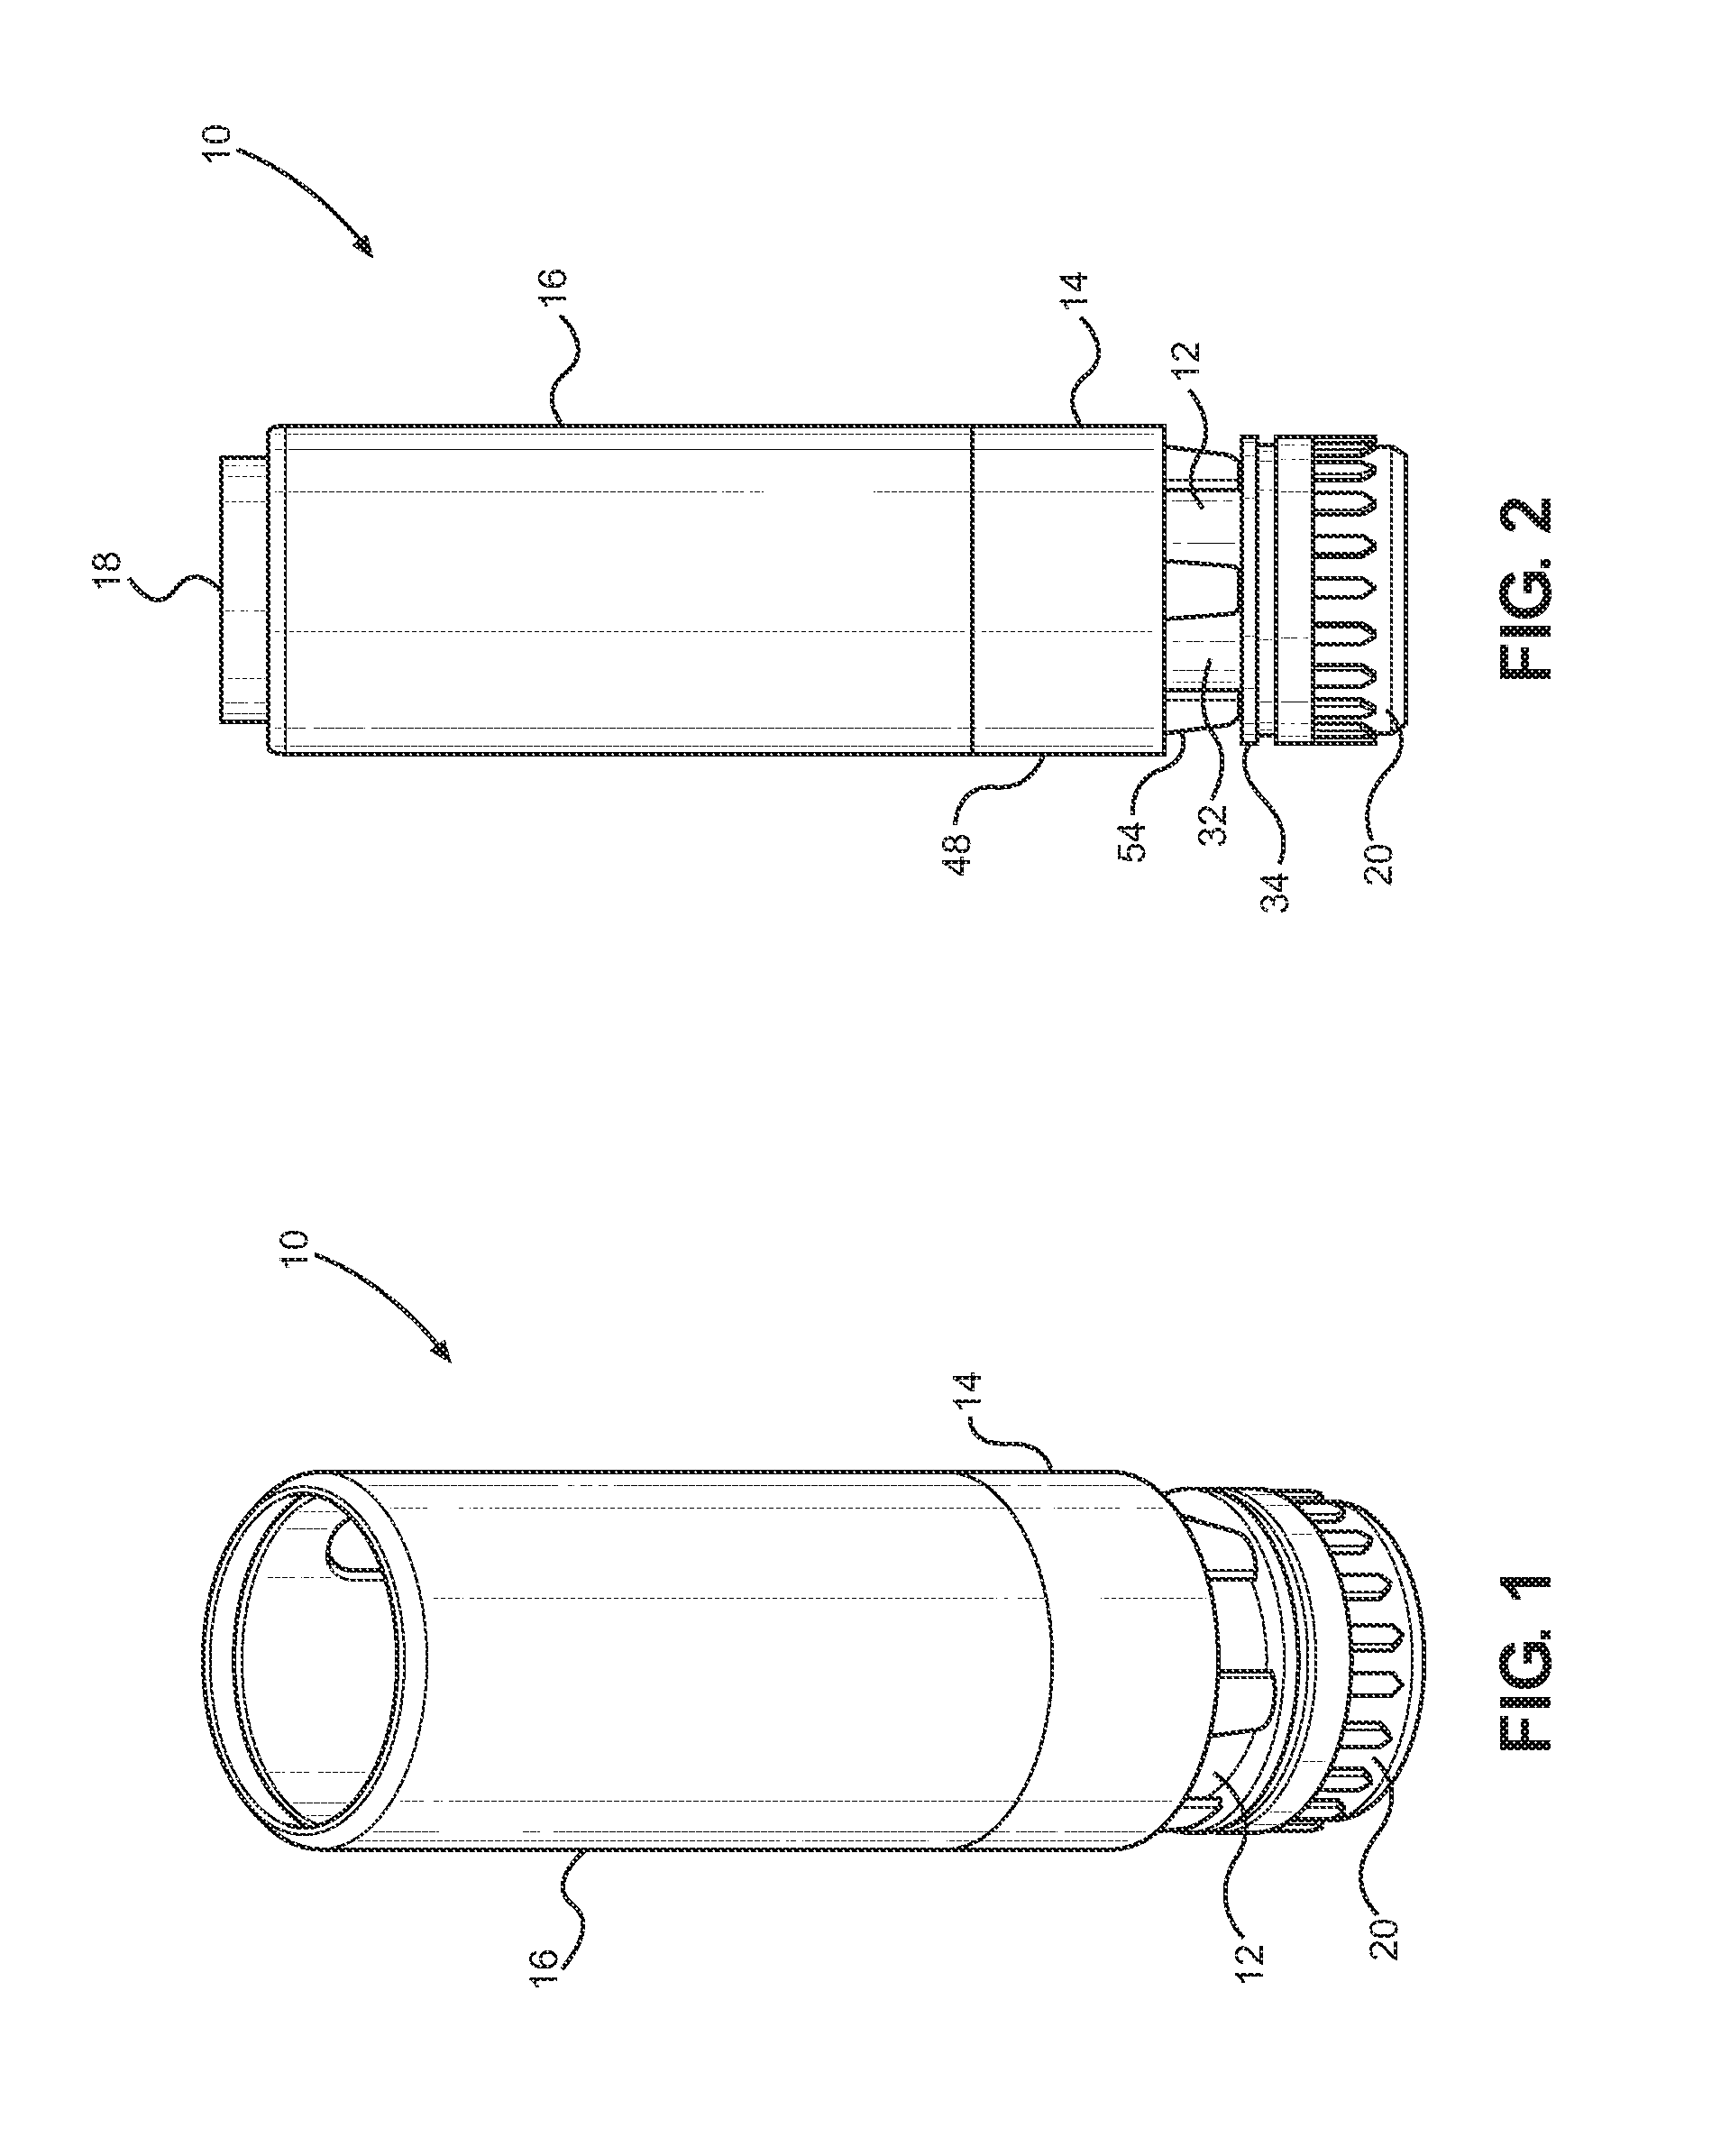 Cosmetic dispenser with frictional resistance